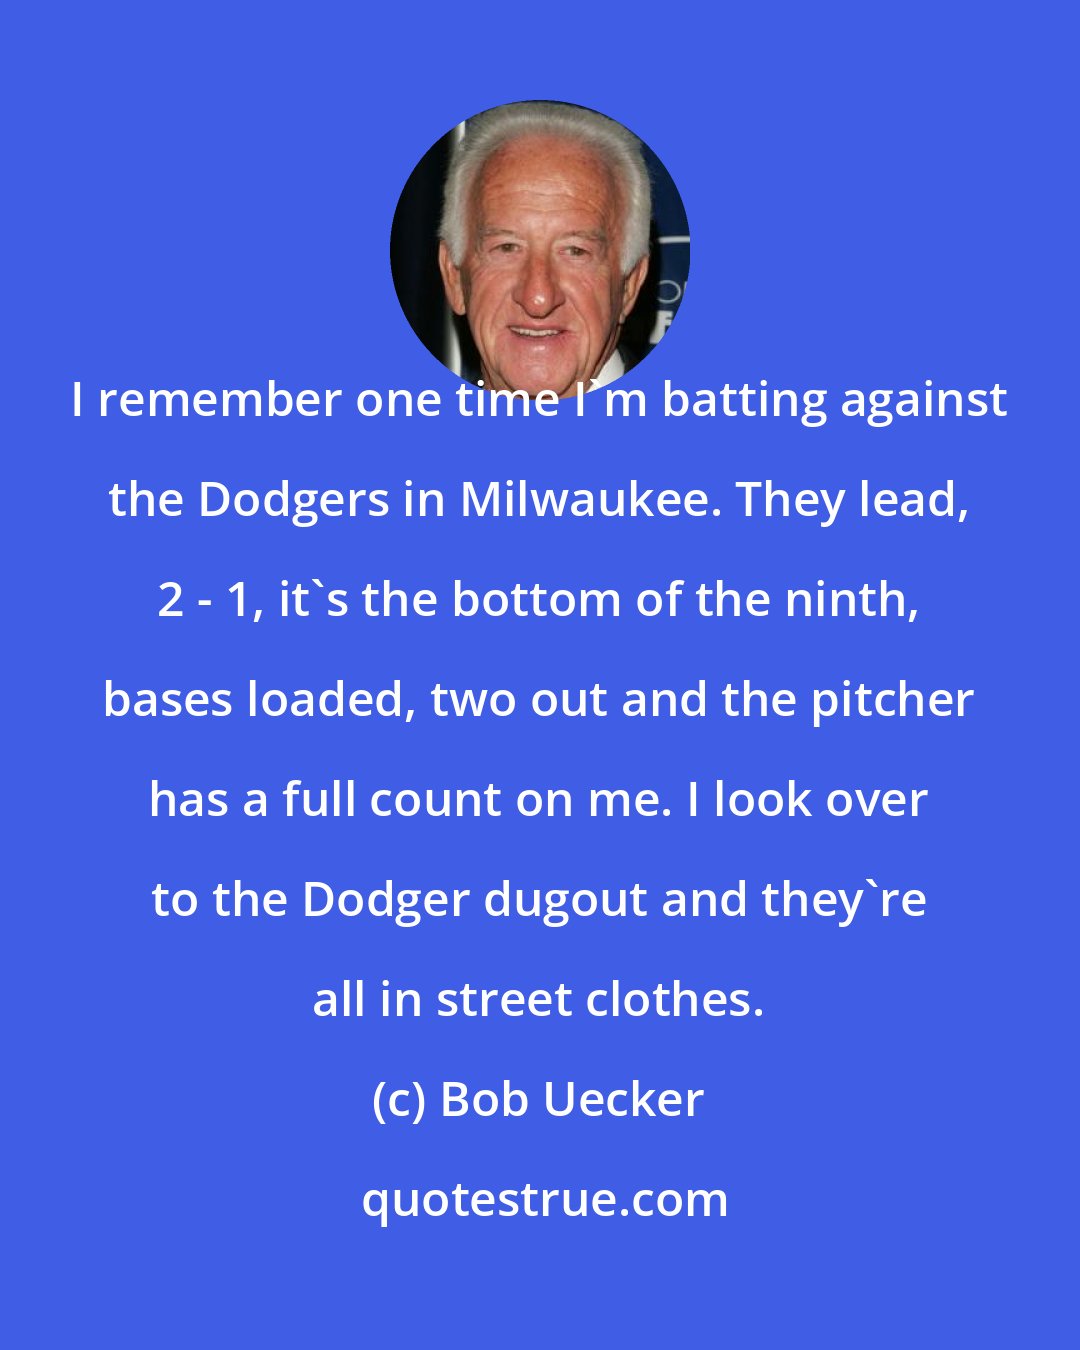 Bob Uecker: I remember one time I'm batting against the Dodgers in Milwaukee. They lead, 2 - 1, it's the bottom of the ninth, bases loaded, two out and the pitcher has a full count on me. I look over to the Dodger dugout and they're all in street clothes.